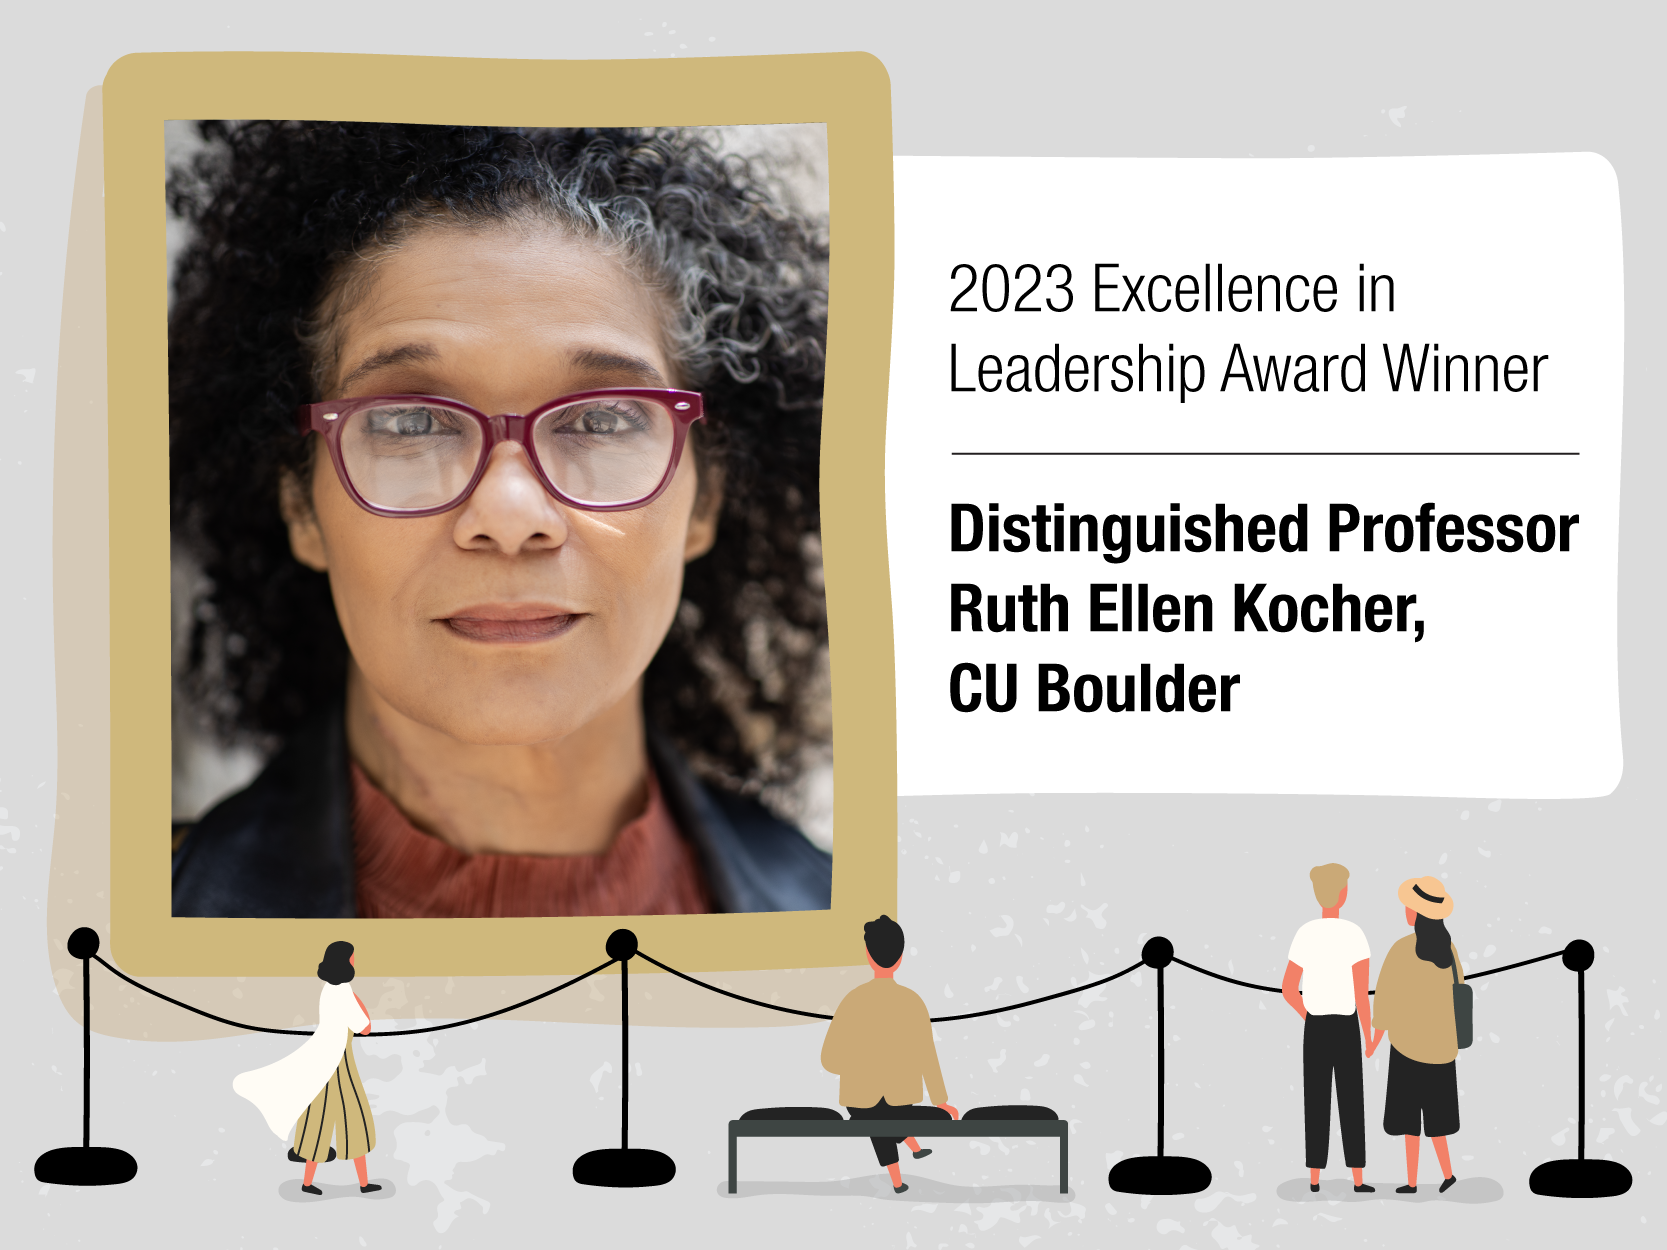 graphic illustration of people standing in an art gallery looking at a framed photo of Distinguished Professor Ruth Ellen Kocher with the accompanying text "2023 Excellence in Leadership Award Winner Distinguished Professor Ruth Ellen Kocher, CU Boulder."